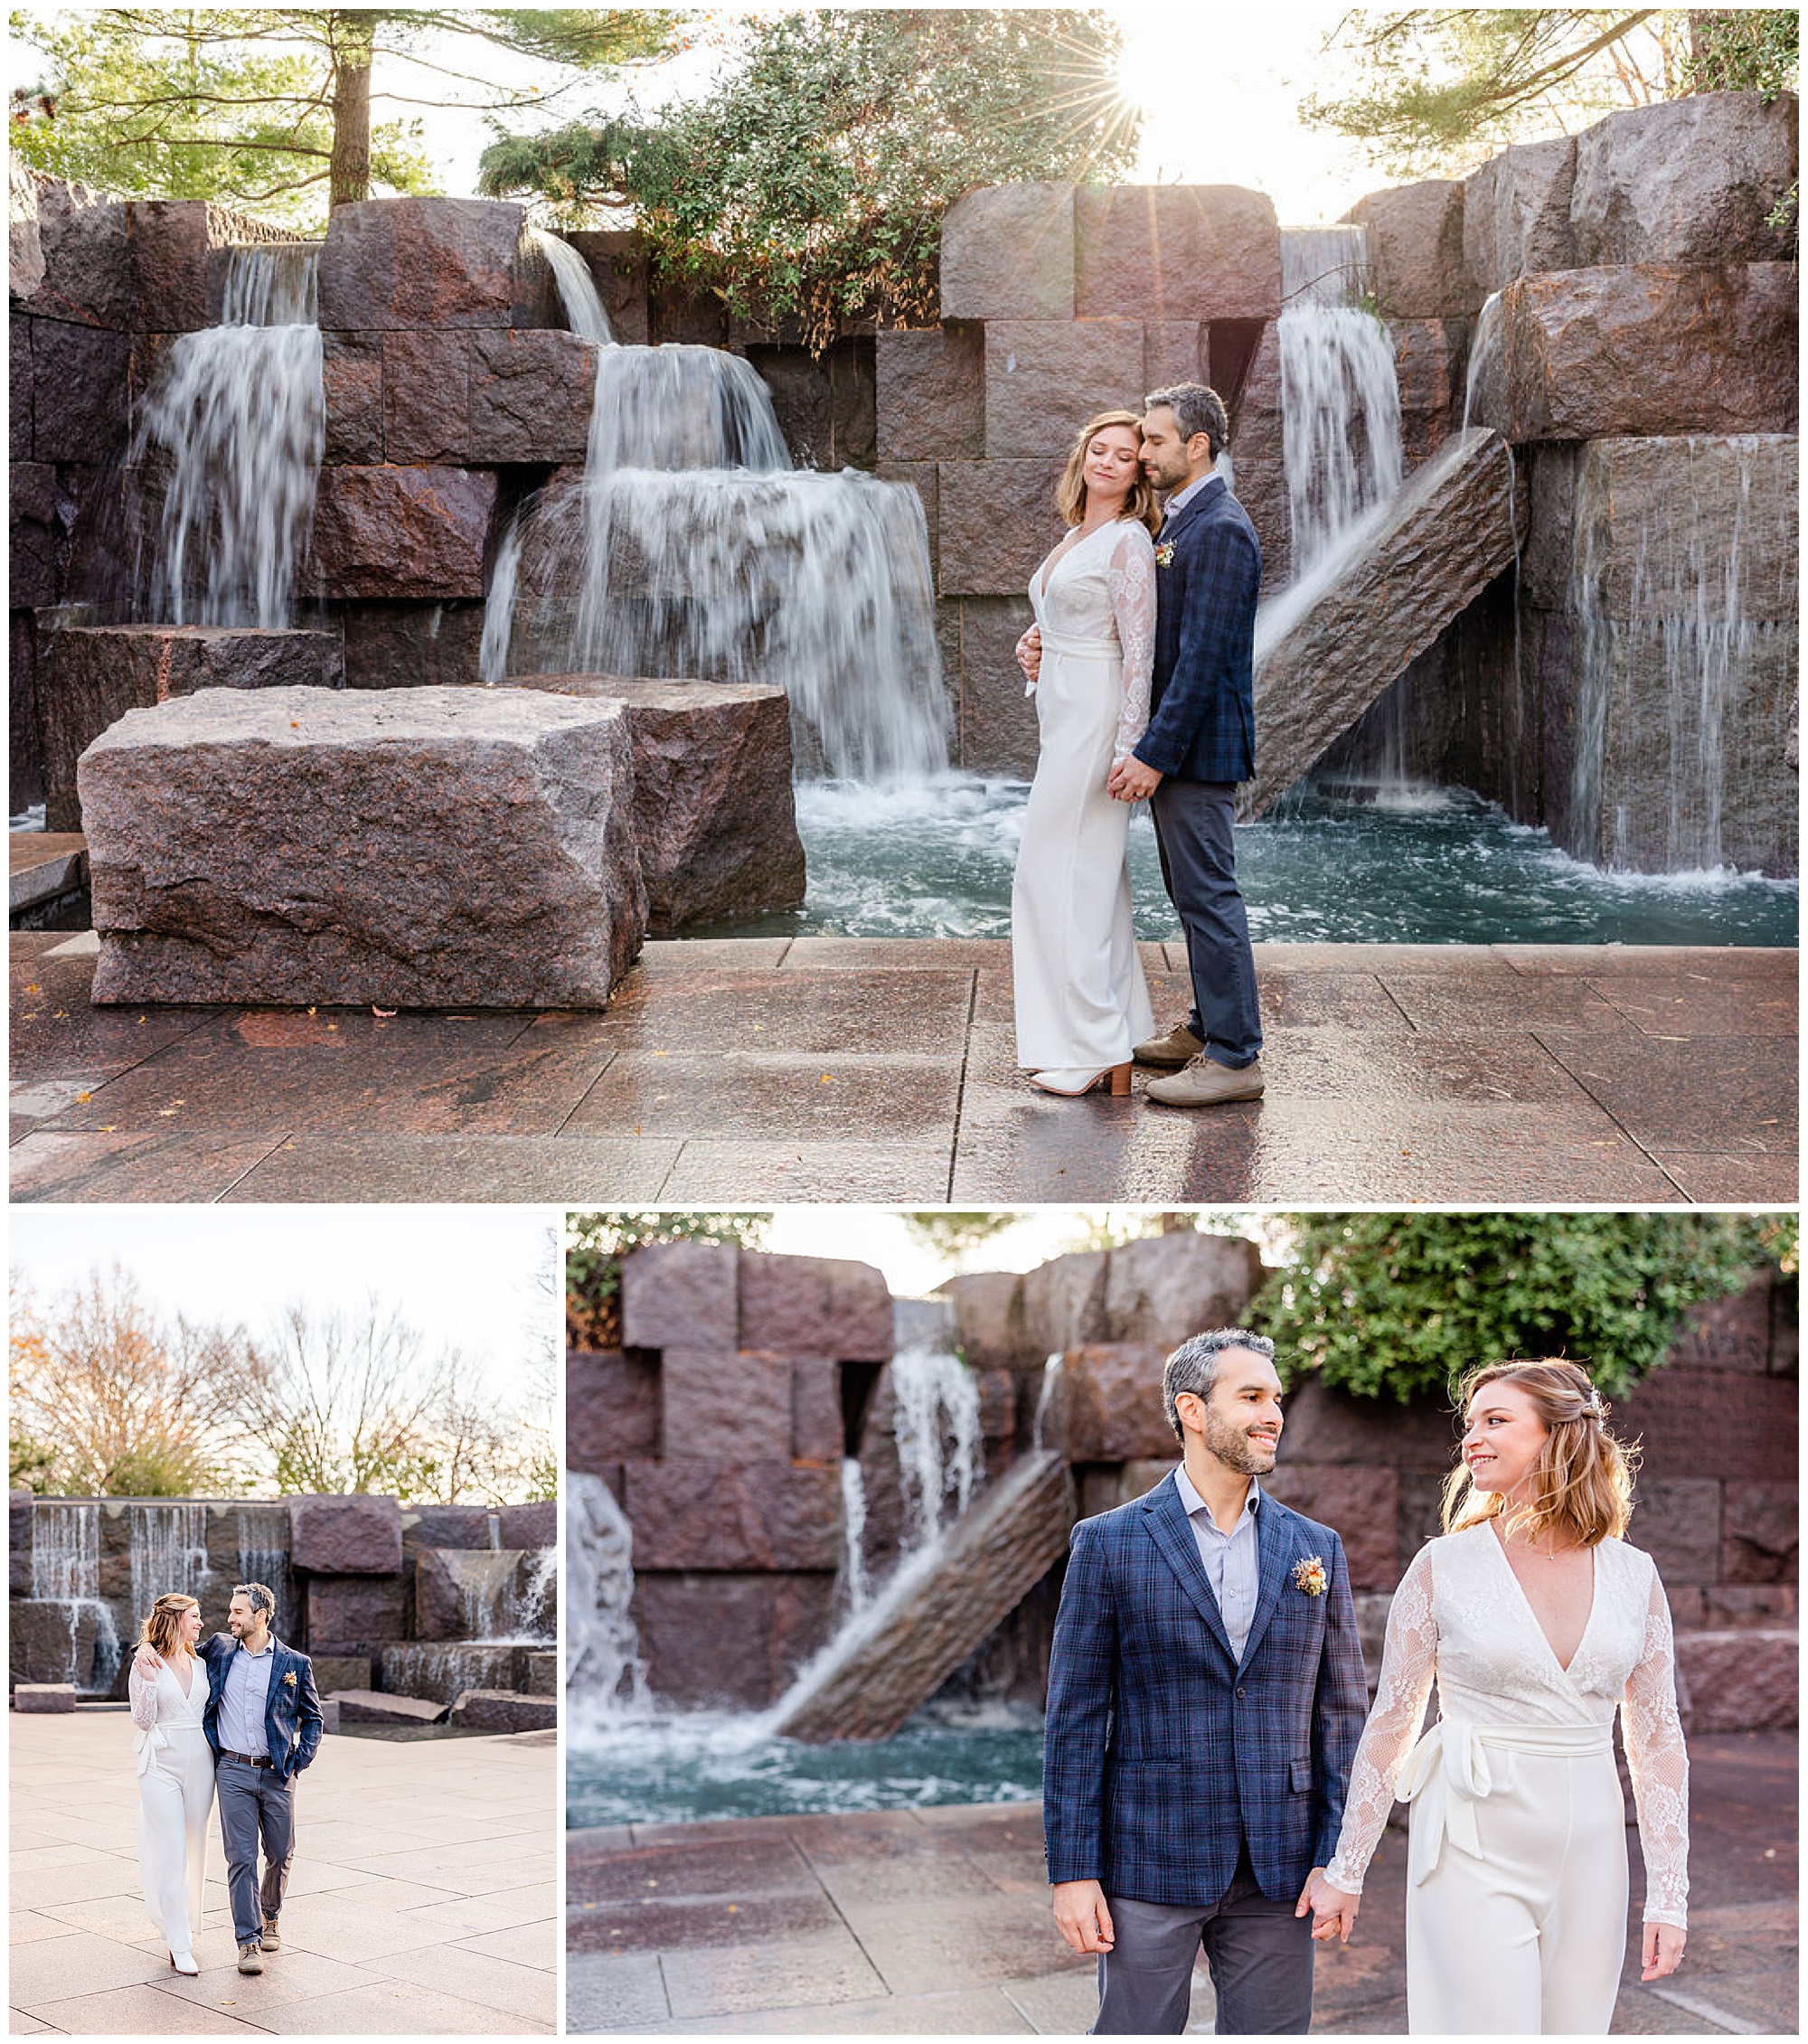 FDR Memorial elopement, DC War Memorial elopement, DC War Memorial photos, DC War Memorial wedding, DC portraits, tidal basin portraits, DC wedding photography, DC elopement photographer, cold weather elopement, Rachel E.H. Photography, man standing behind woman, couple in front of waterfall, couple walking and laughing, navy plaid suit